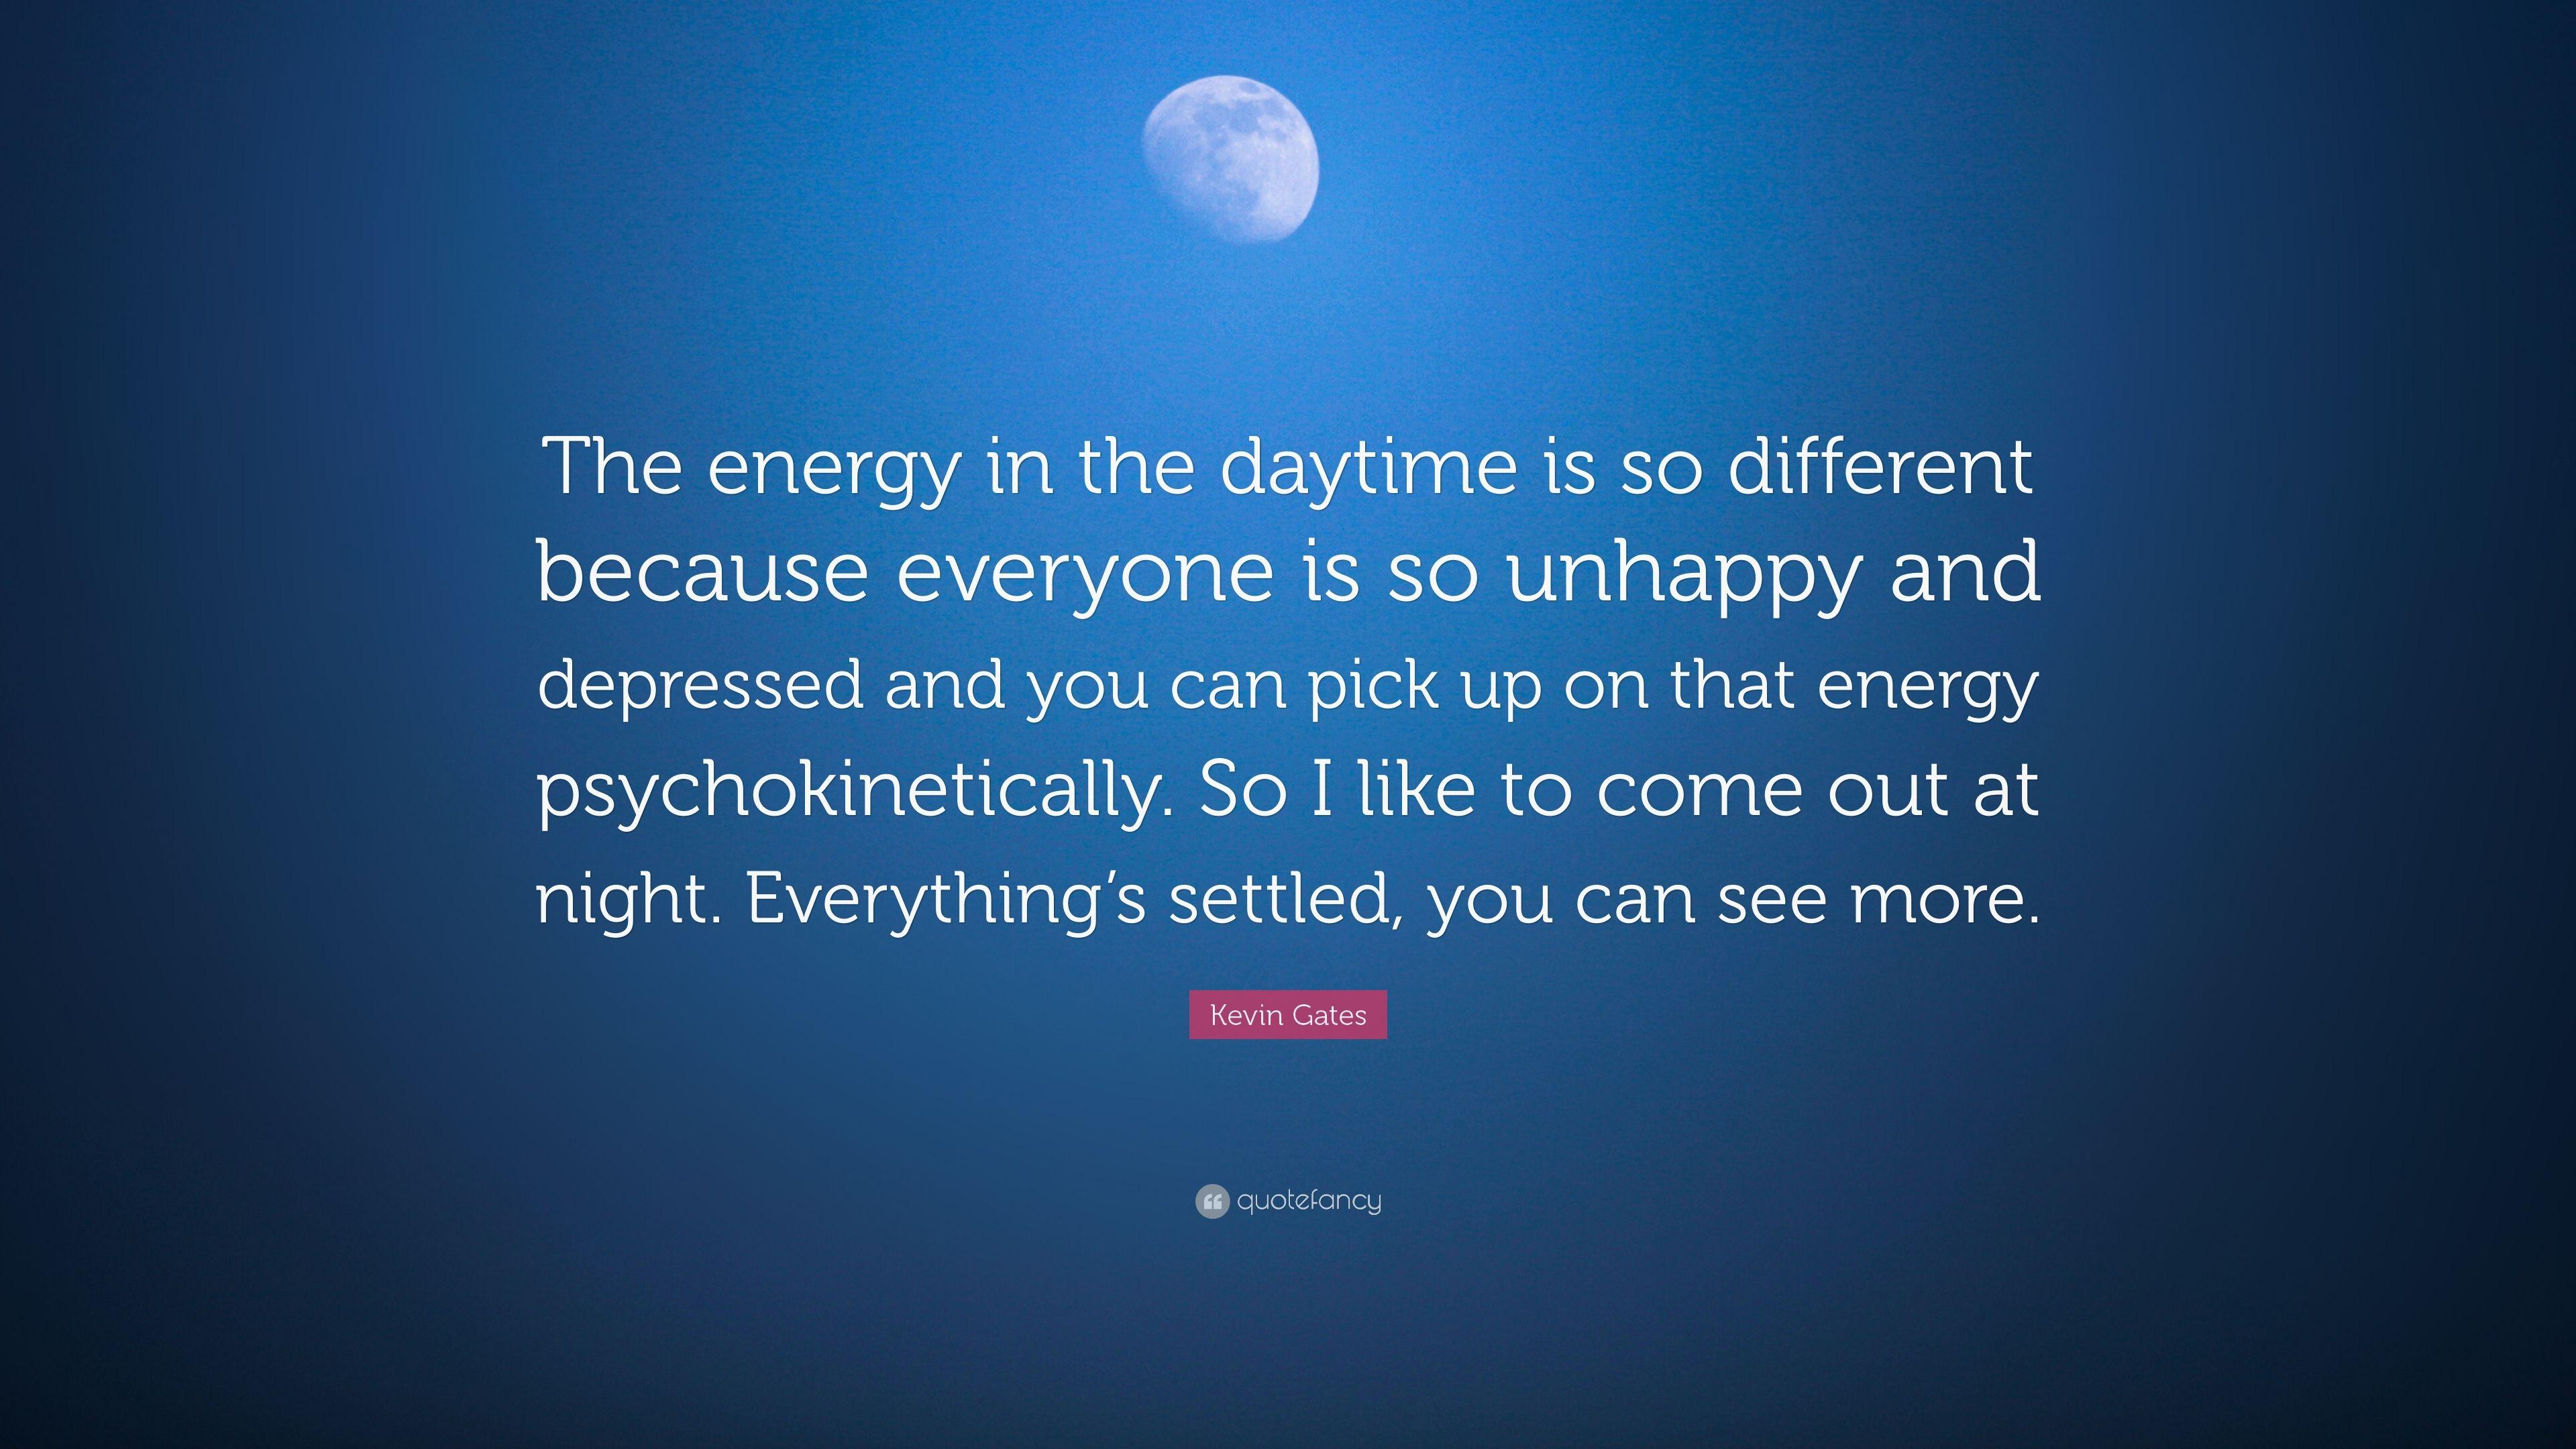 Kevin Gates Quote: “The energy in the daytime is so different